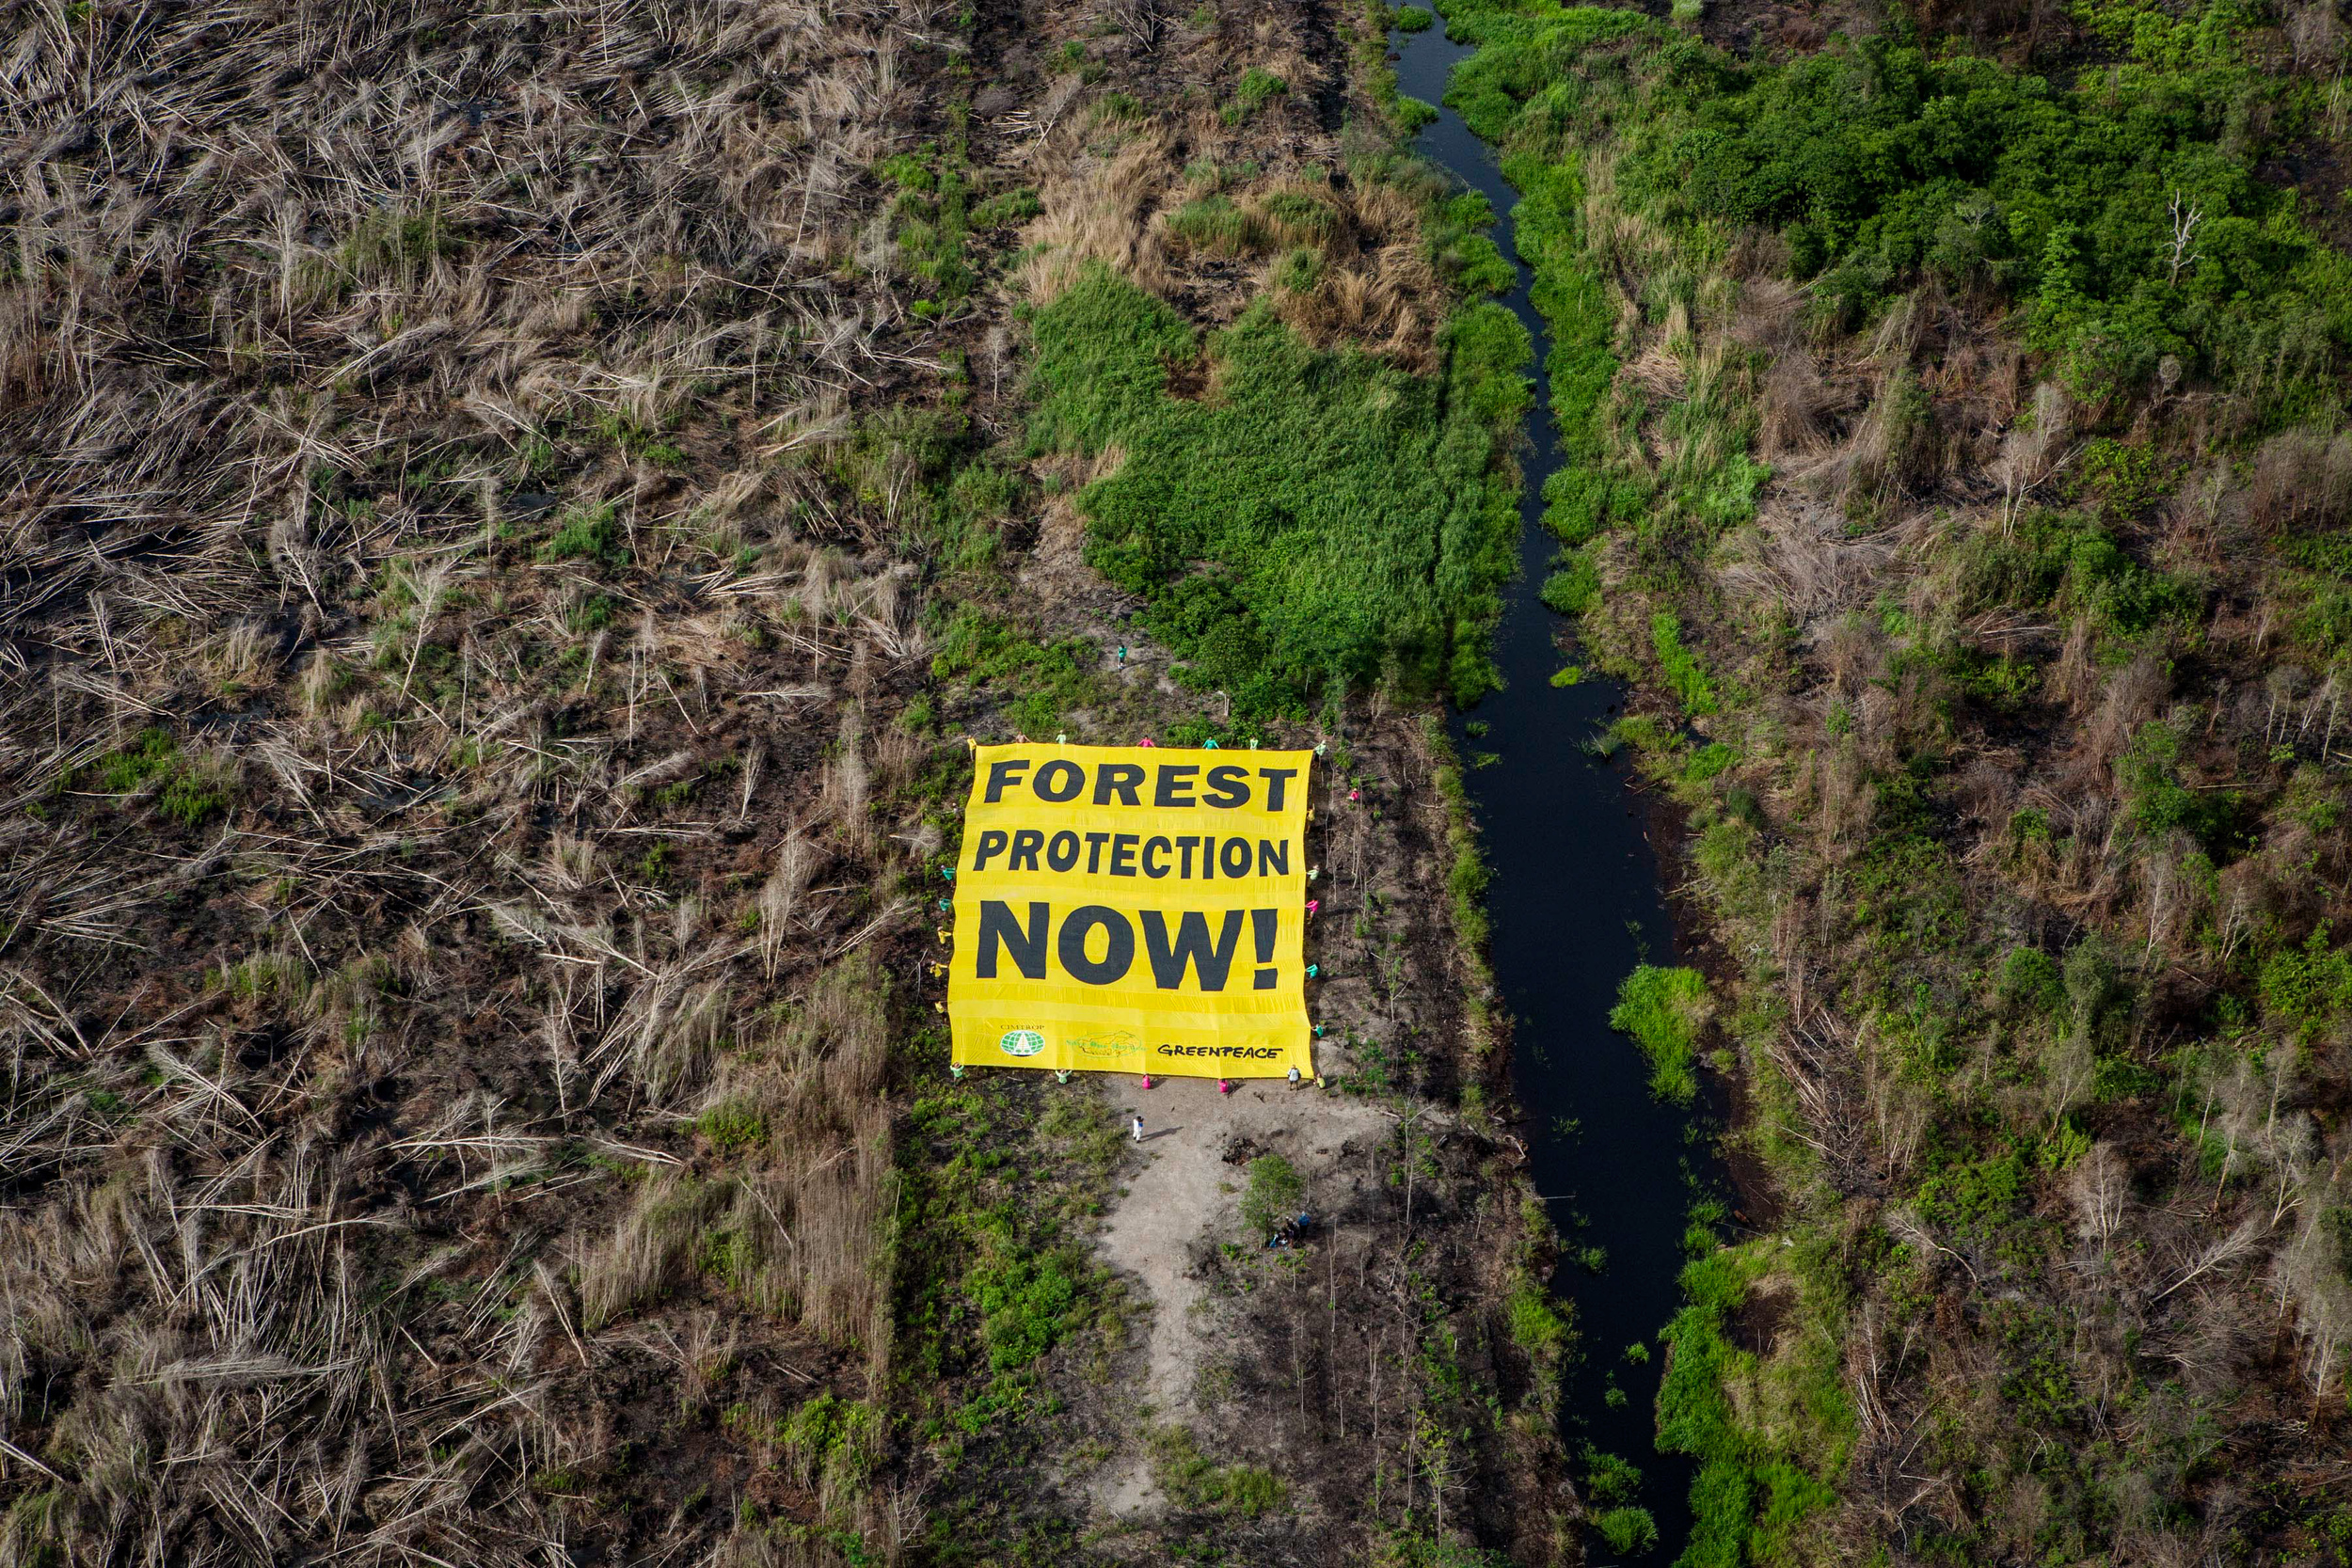 forest-protection-now_credit-ulet-ifansasti,-greenpeace.jpg